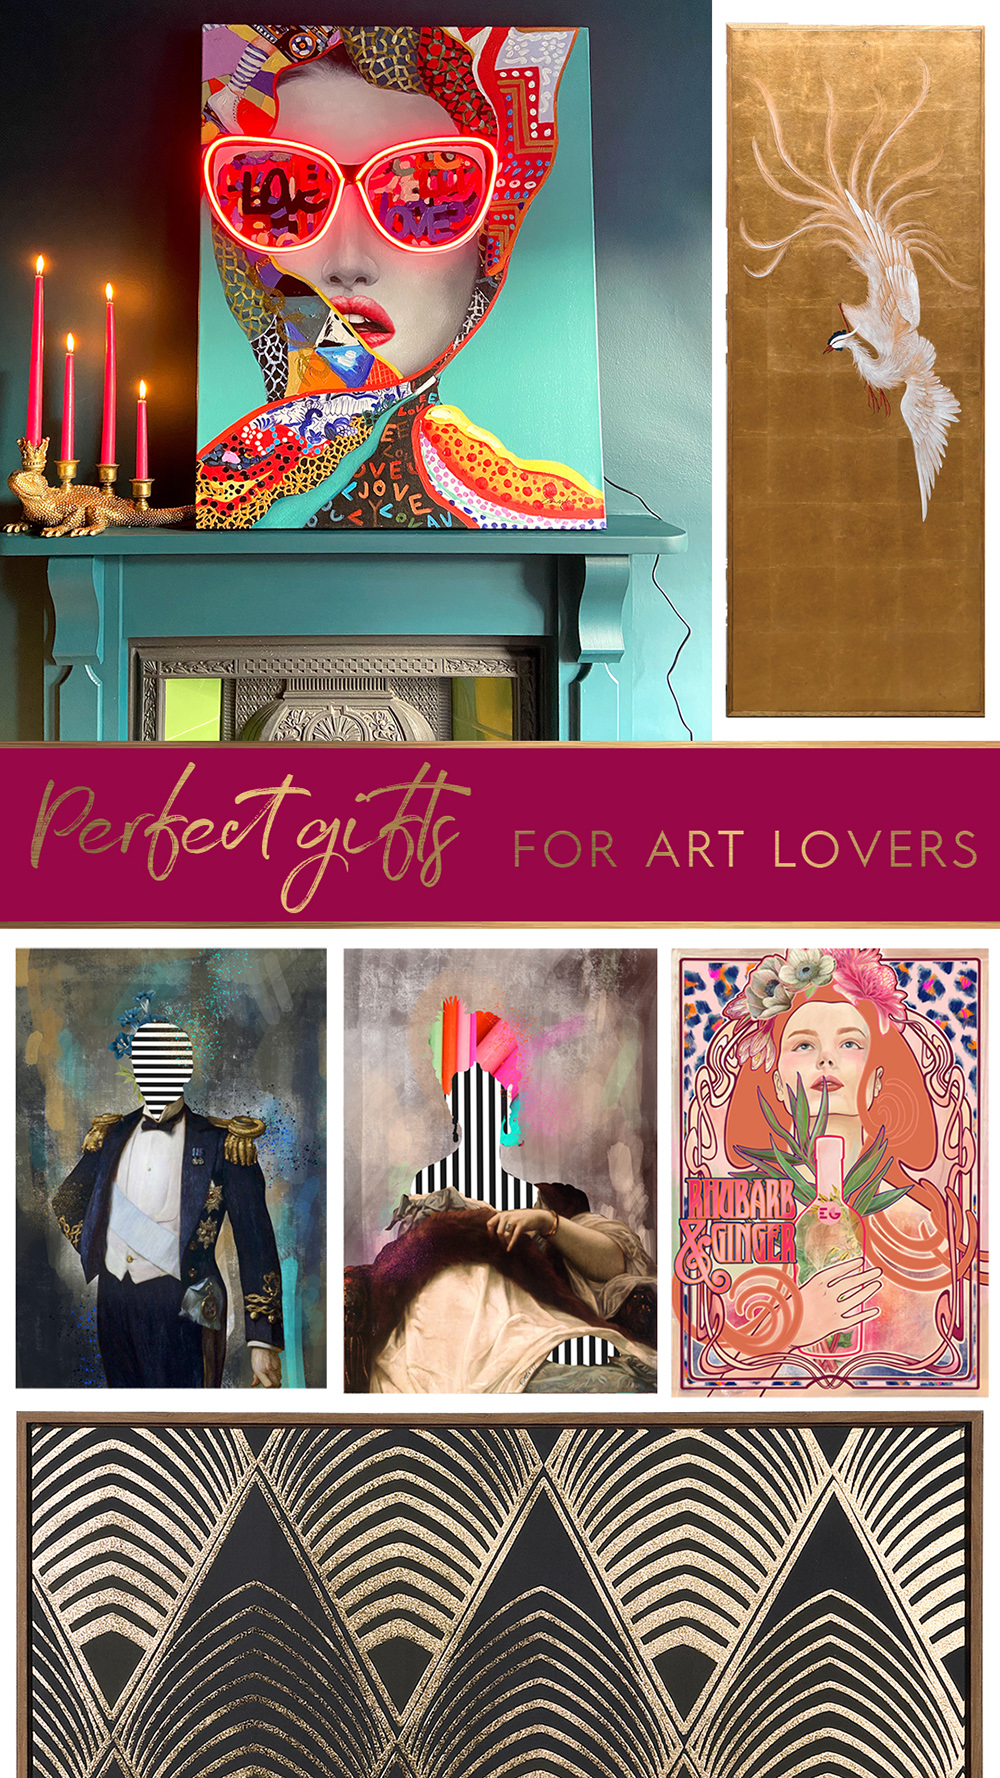 We all know an art lover - someone who adorns their walls with fabulously colourful and quirky art.  Perhaps there's a spot in their gallery wall just waiting for the perfect piece, or maybe you've spotted they have a blank wall that just HAS to be filled!  Here's our pick of the best gifts for the art lover in your life.